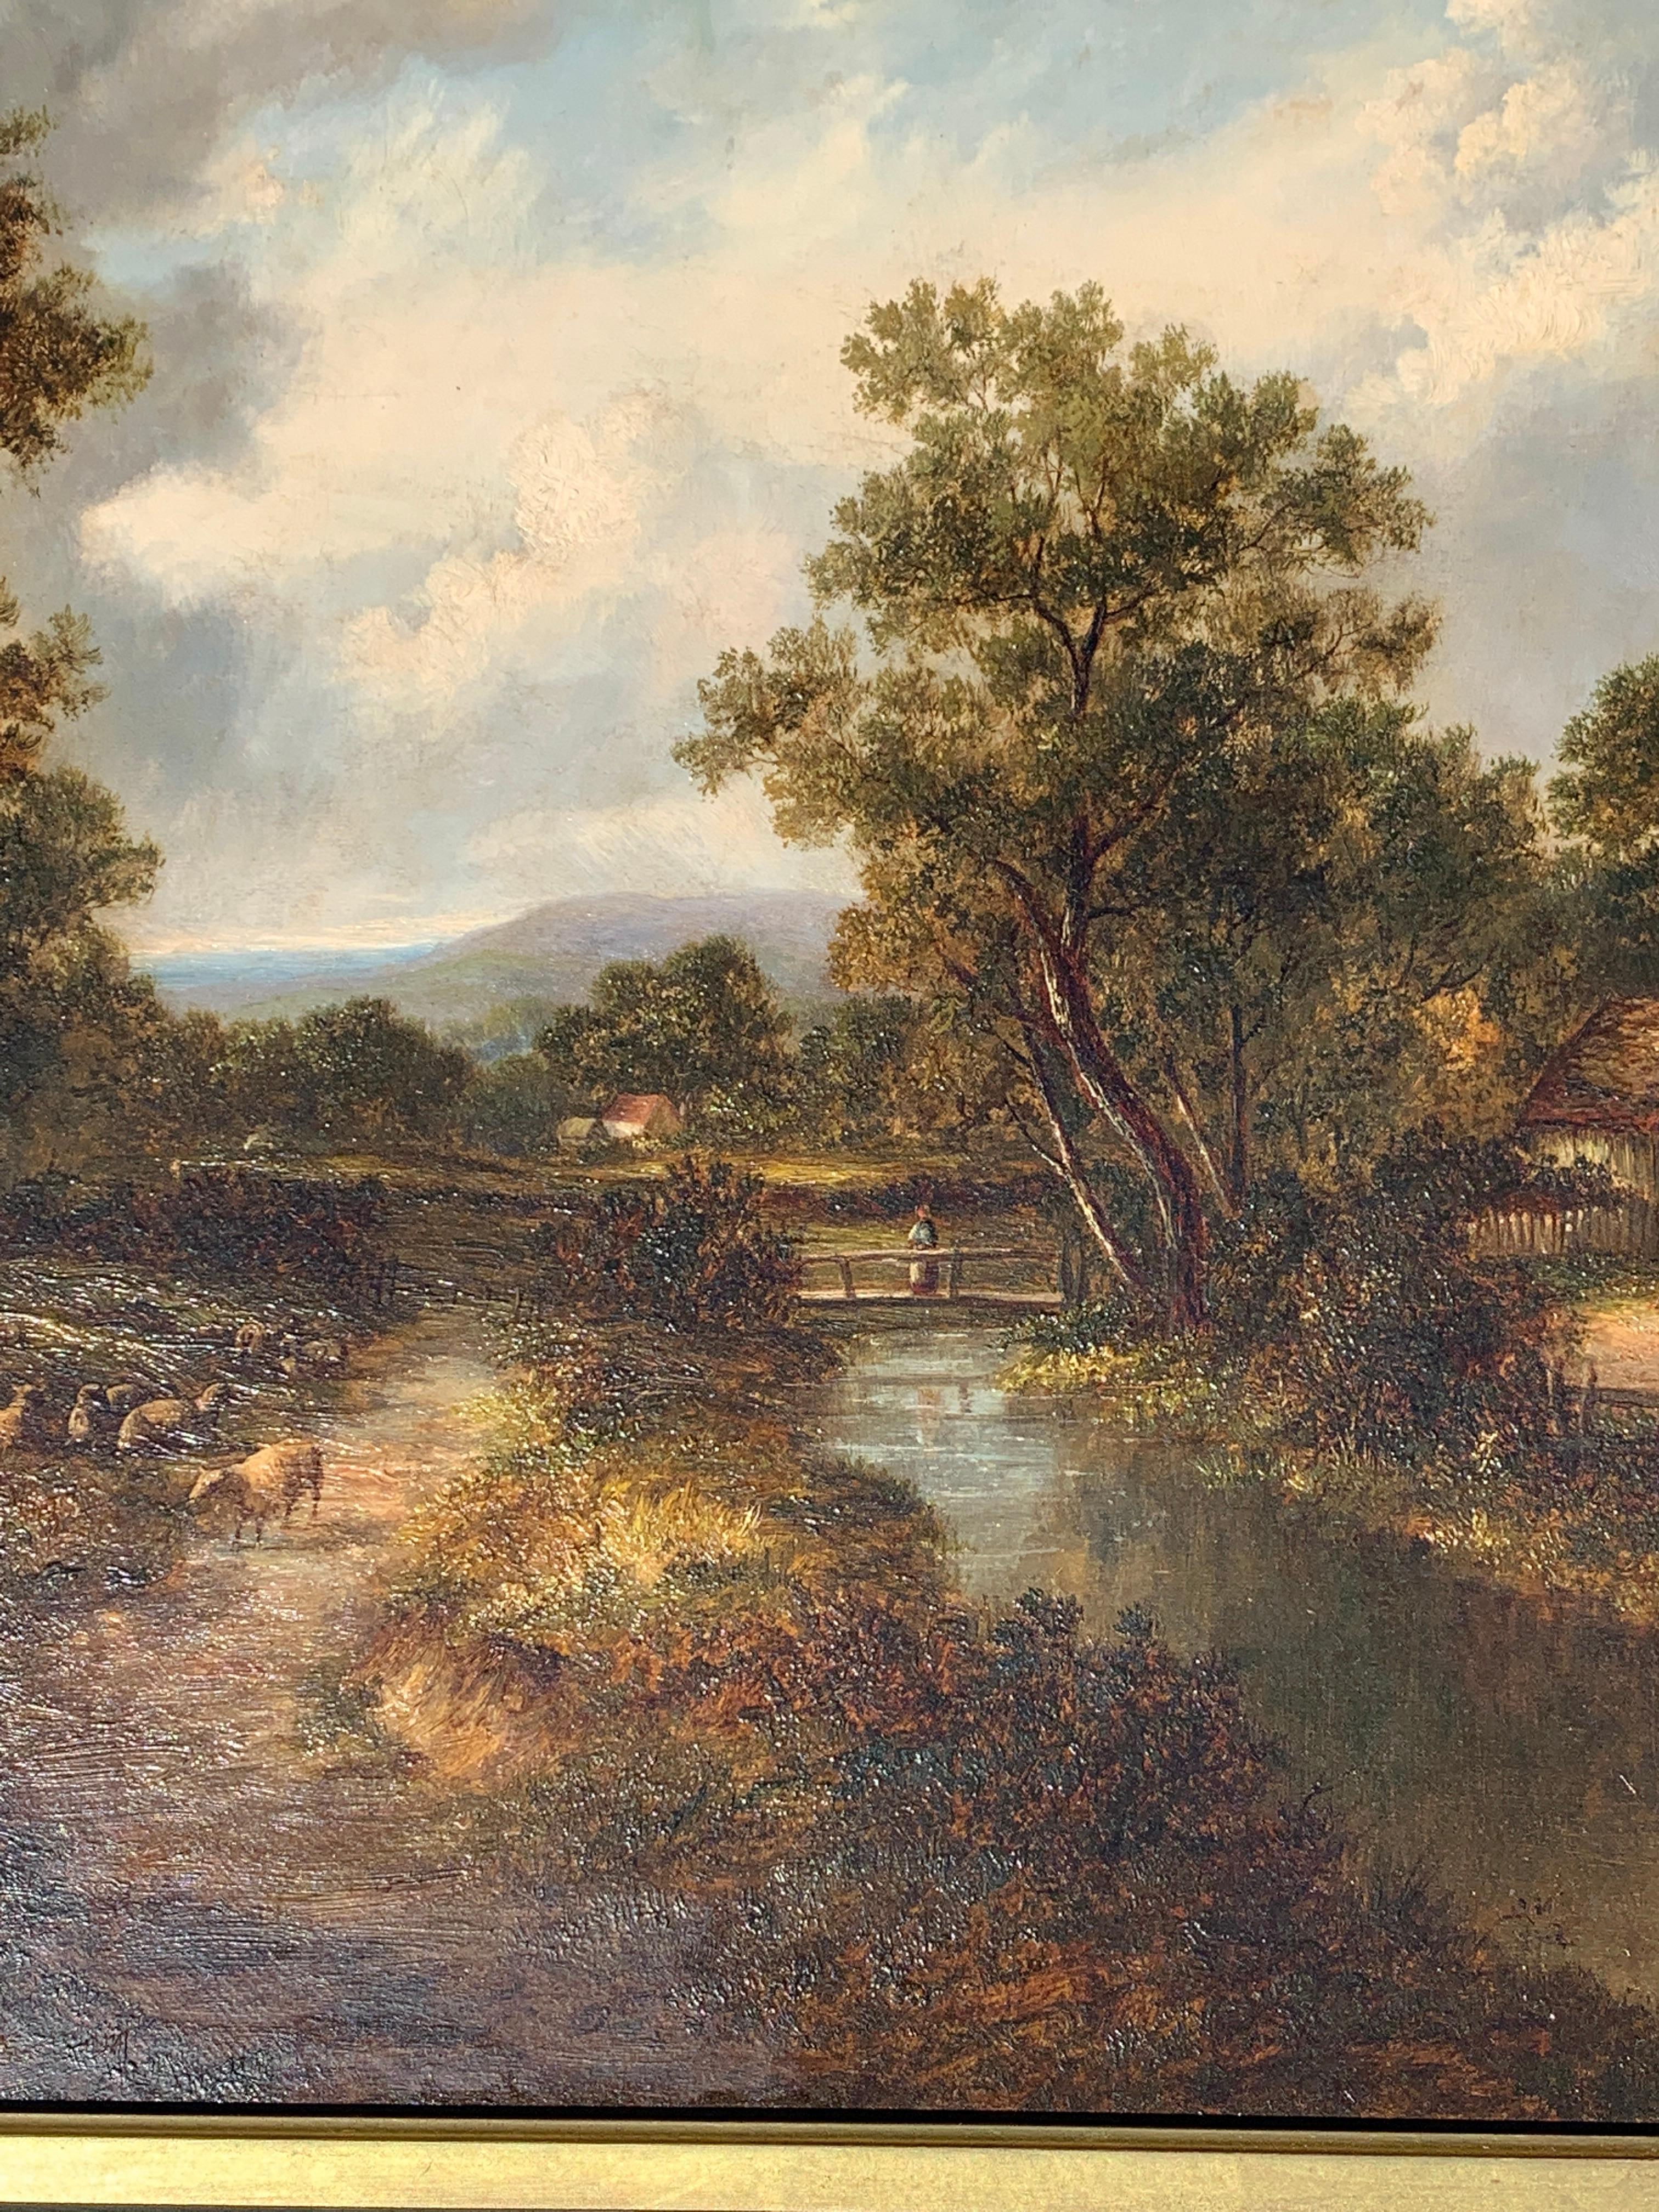 19th century Victorian English Village scene, with sheep, Cottage and river - Brown Landscape Painting by Joseph Thors